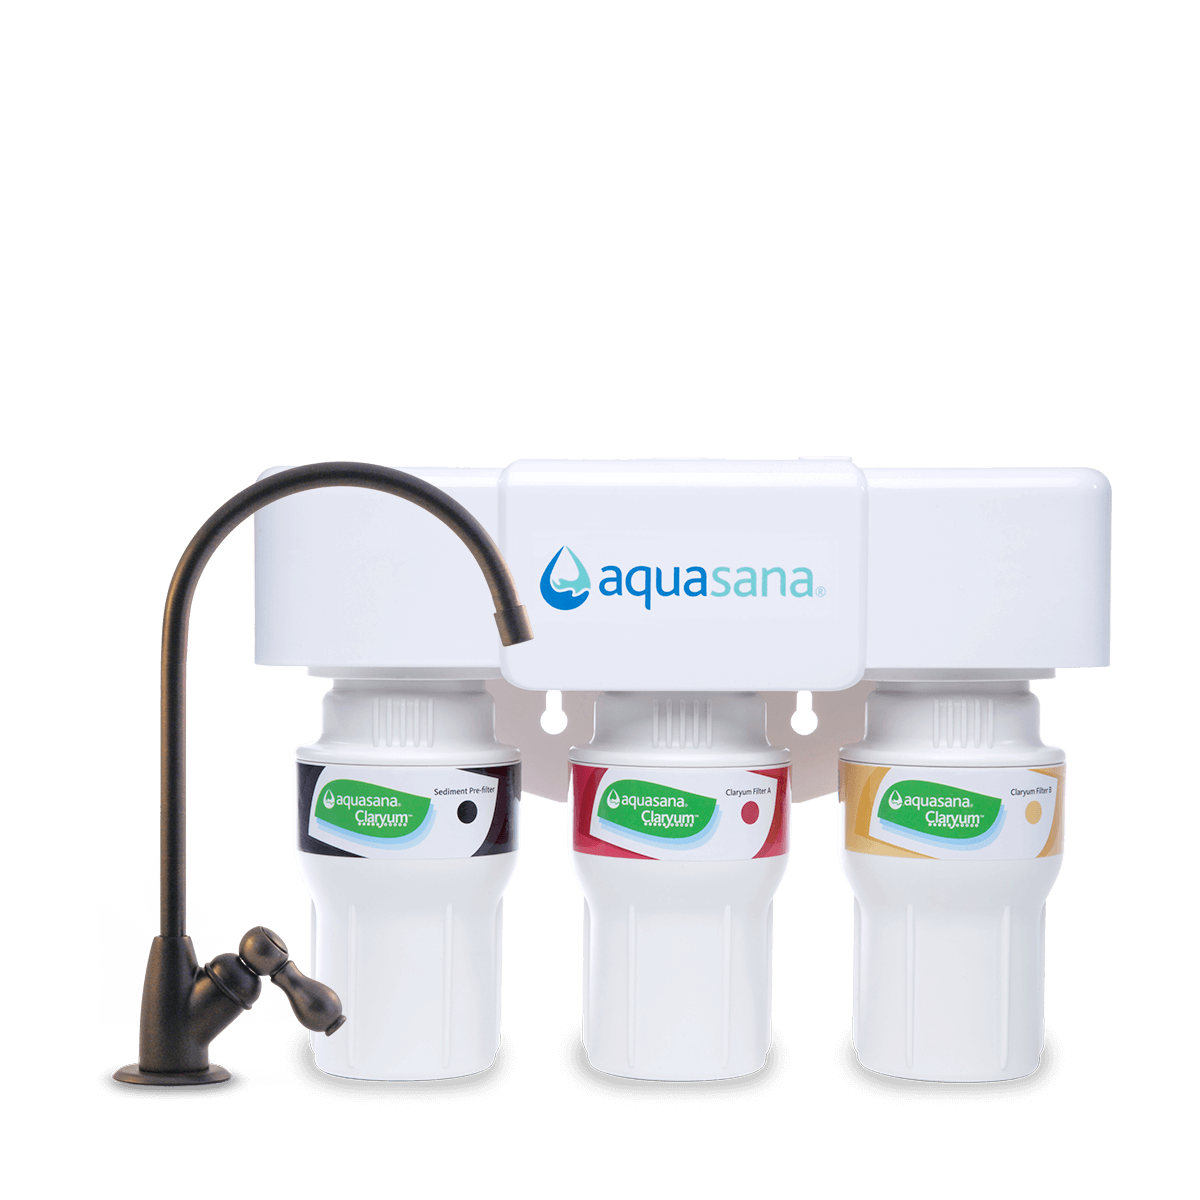 Aquasana 3-Stage Under Sink Water Filter, Oil Rubbed Bronze, 1/2 Year/600 Gallon photo